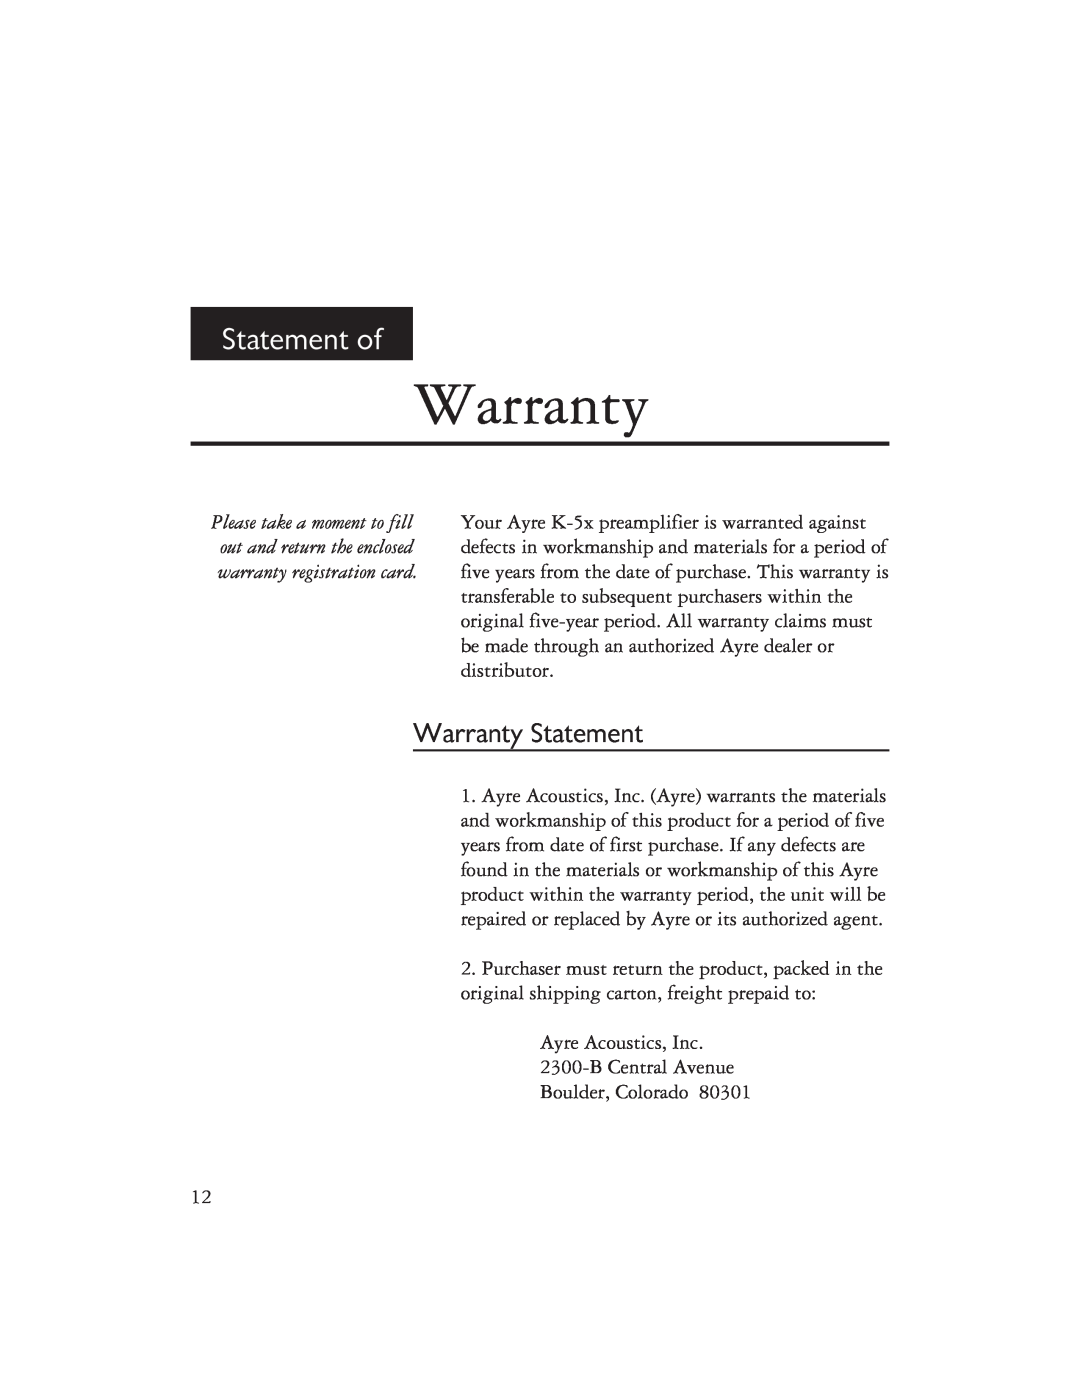 Ayre Acoustics K-5x owner manual Statement of, Warranty Statement 